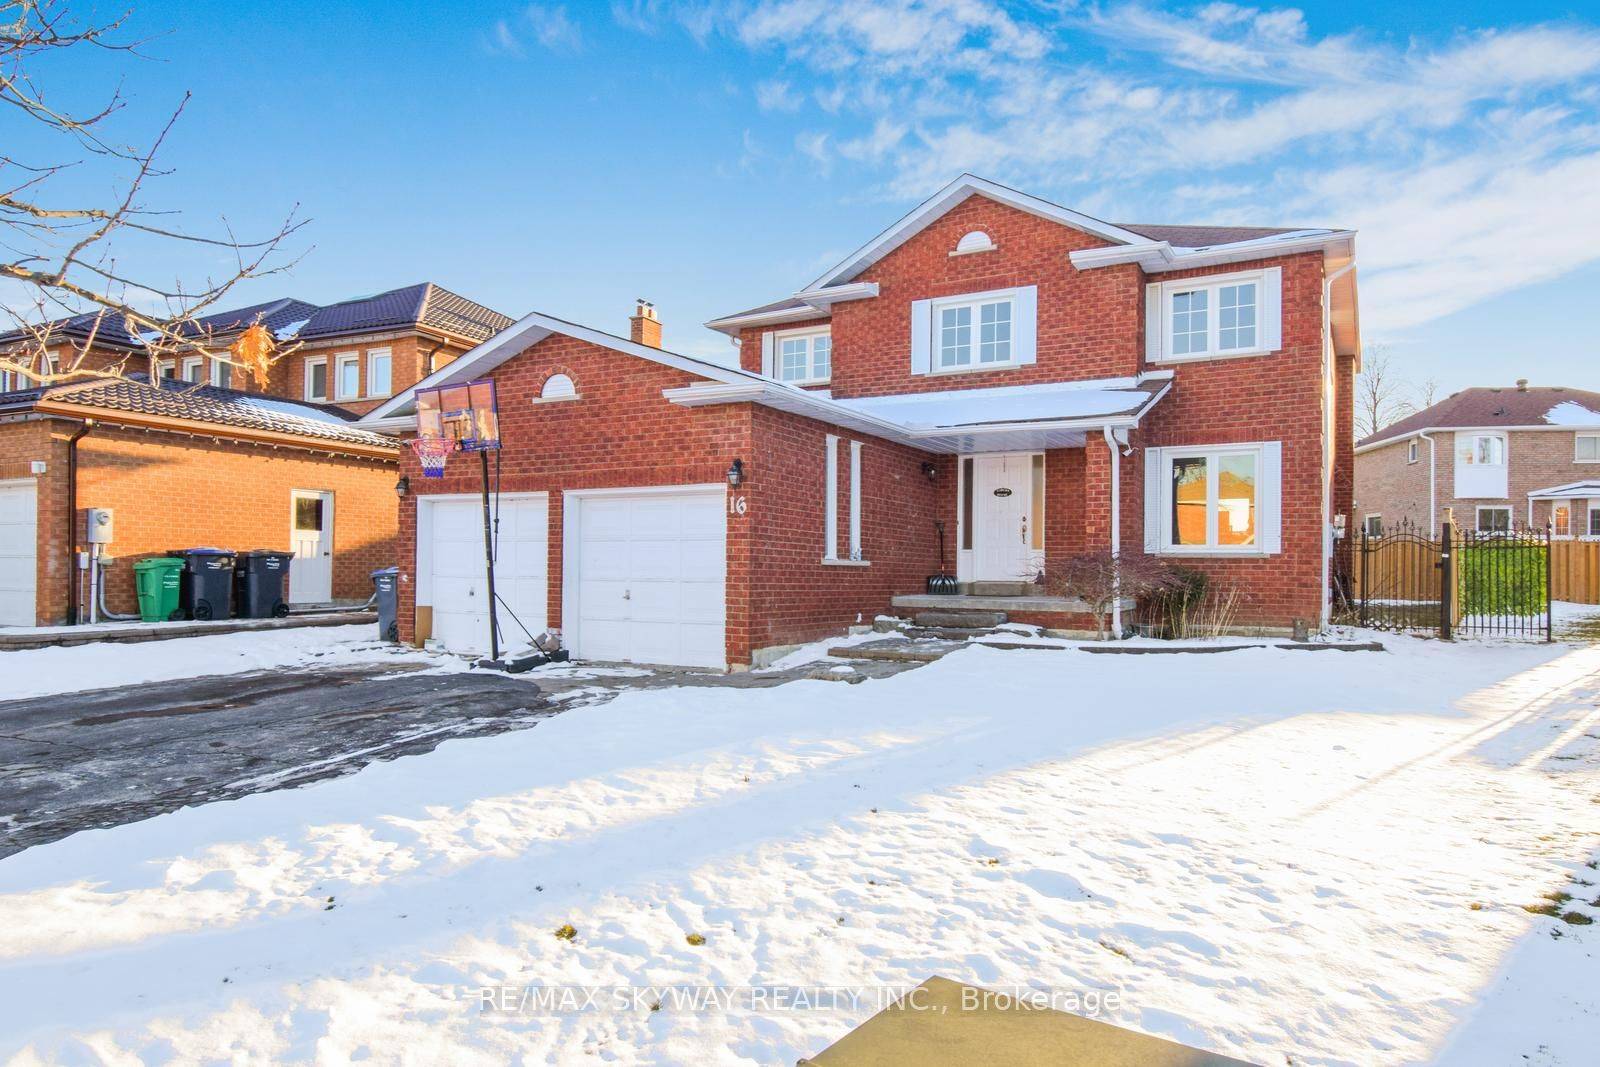 Nestled in the heart of Brampton, we are thrilled to introduce a phenomenal 4 bedroom, 3 bathroom detached home.